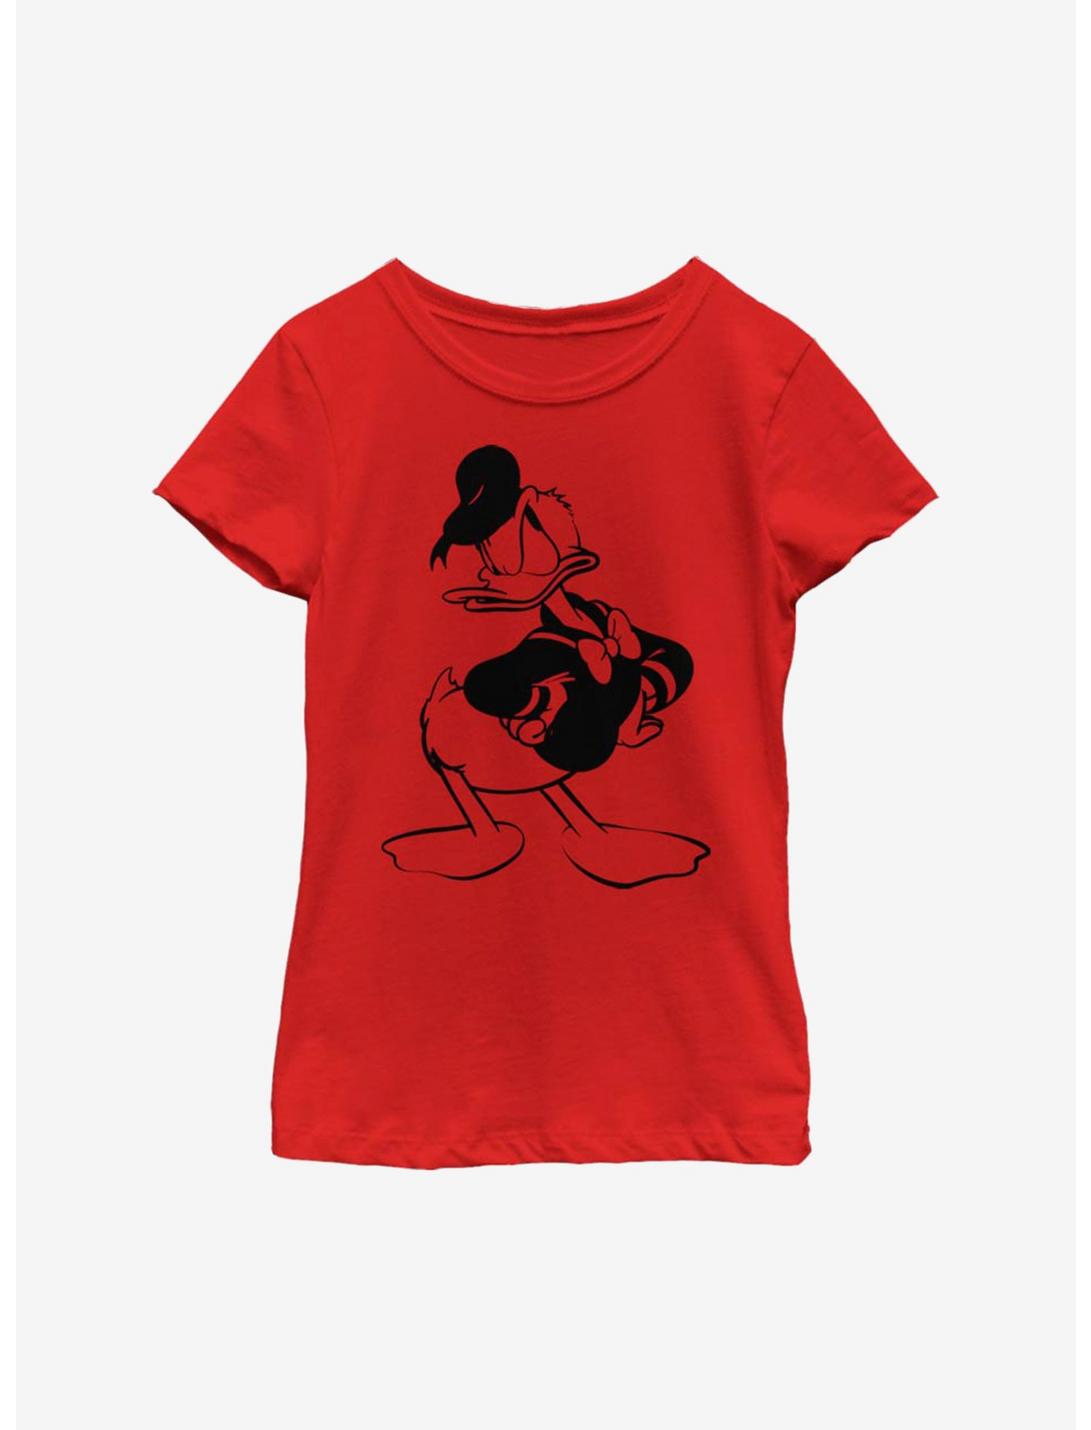 Disney Donald Duck In A Mood Youth Girls T-Shirt, RED, hi-res